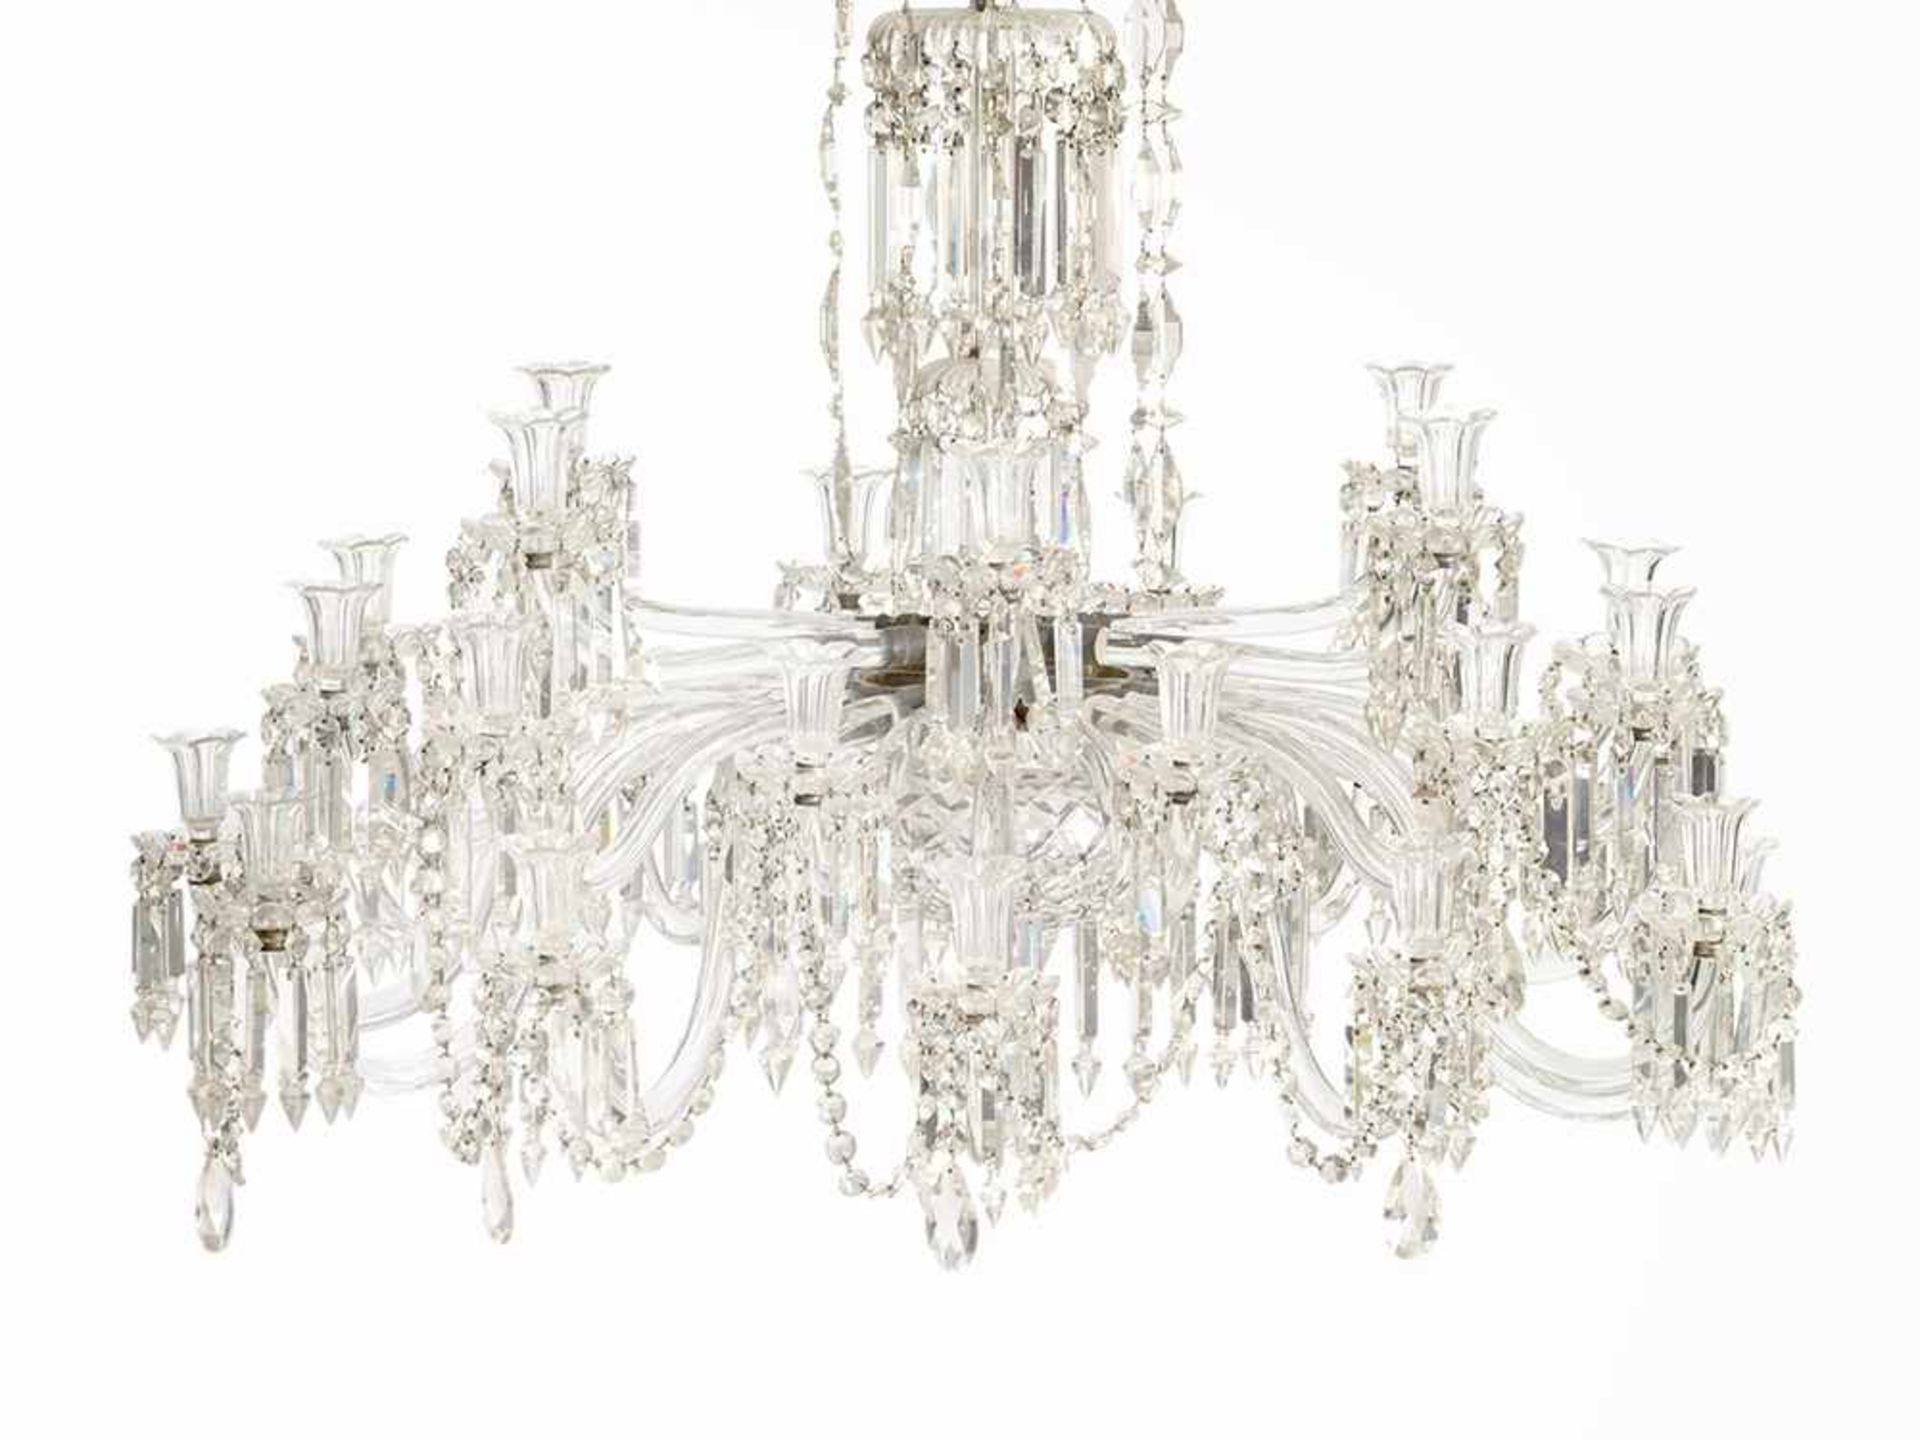 Magnificent Baccarat Chandelier, France, 19th C. Baccarat crystal France, 19th century 30 electric - Image 2 of 10